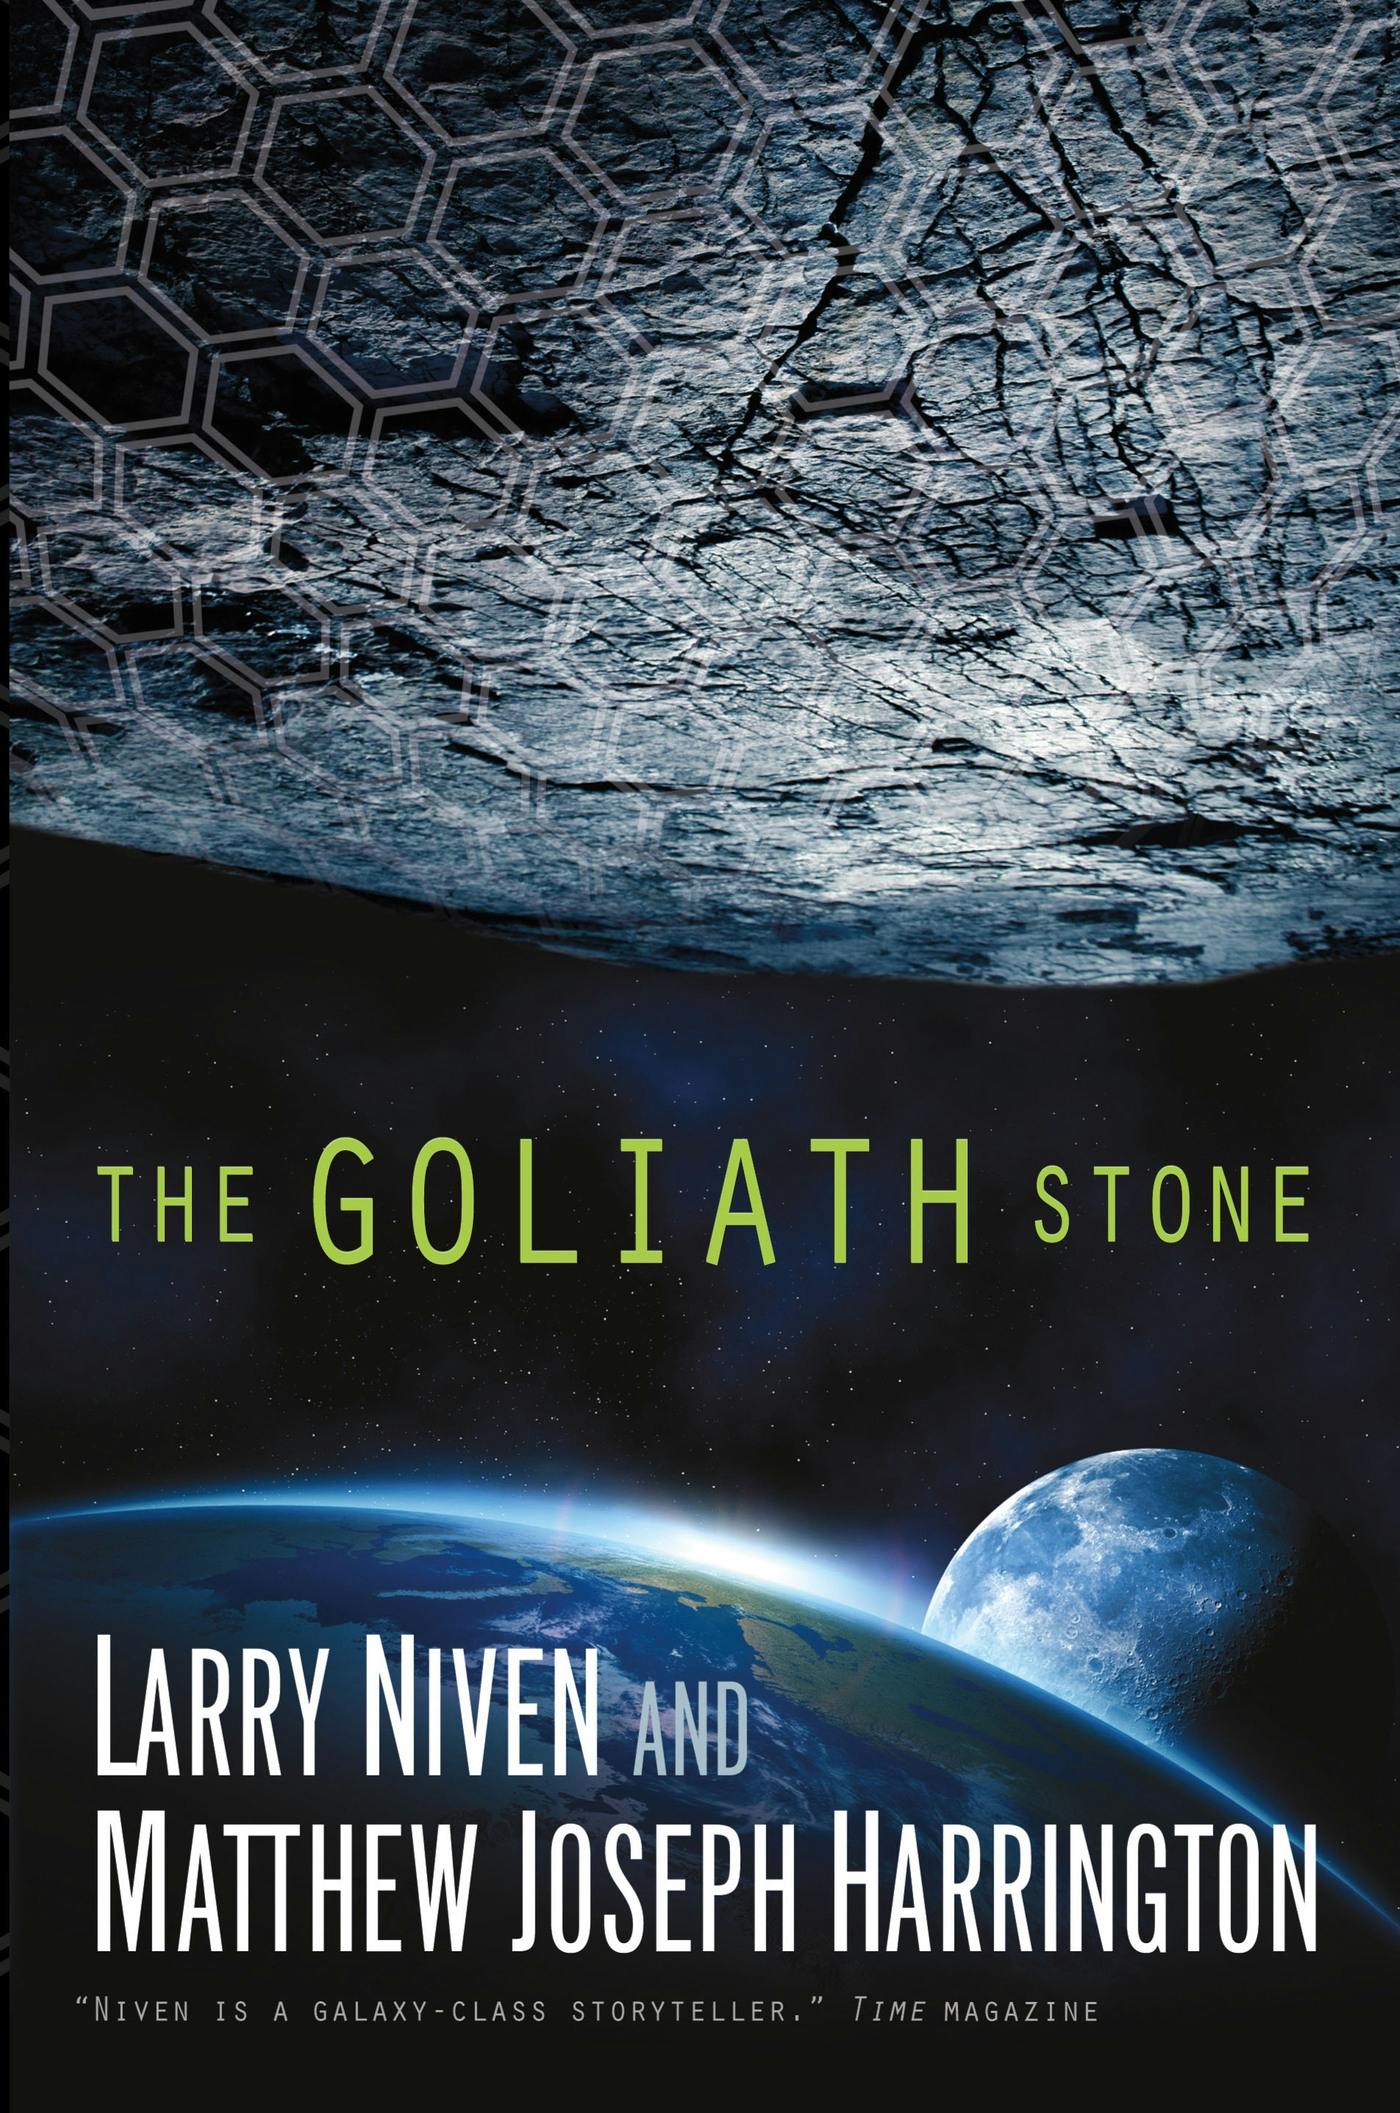 Cover for the book titled as: The Goliath Stone